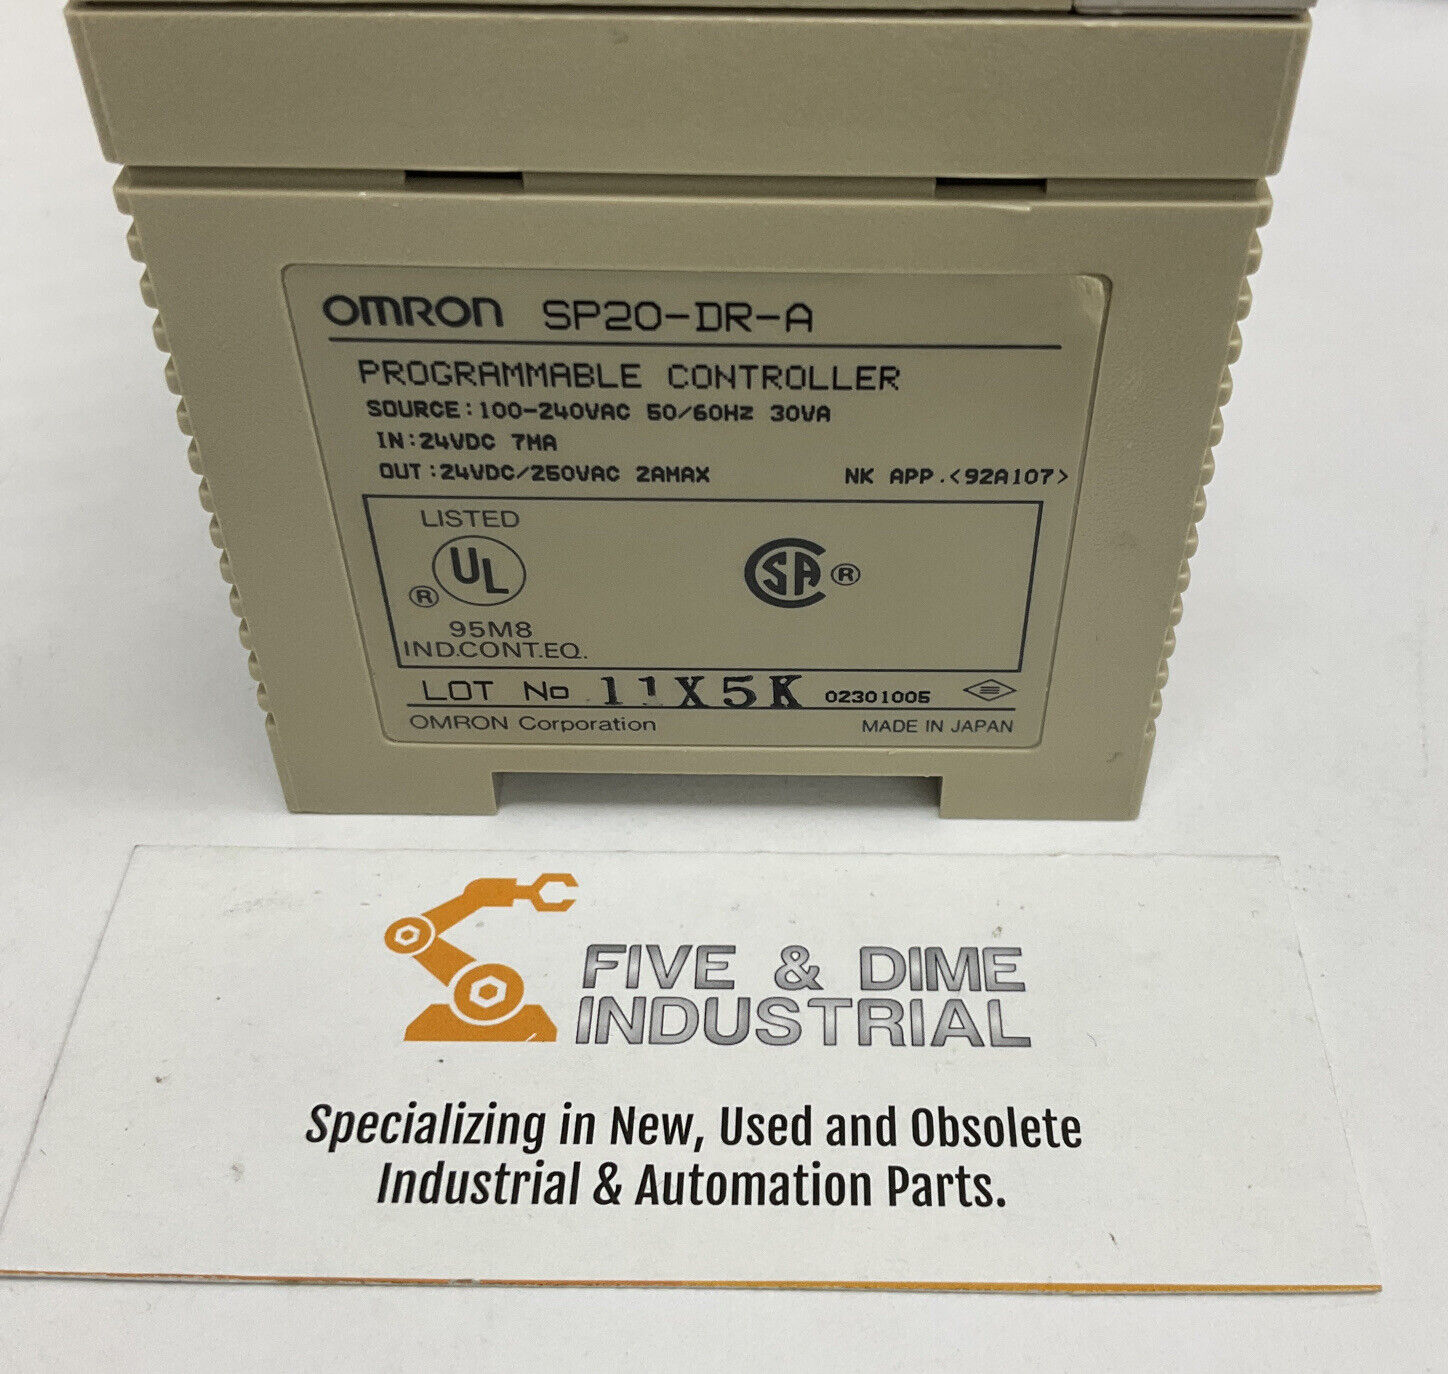 OMRON SP20-DR-A SYSMAC MINI PROGRAMMABLE CONTROLLER 240VAC 30V  (RE255)